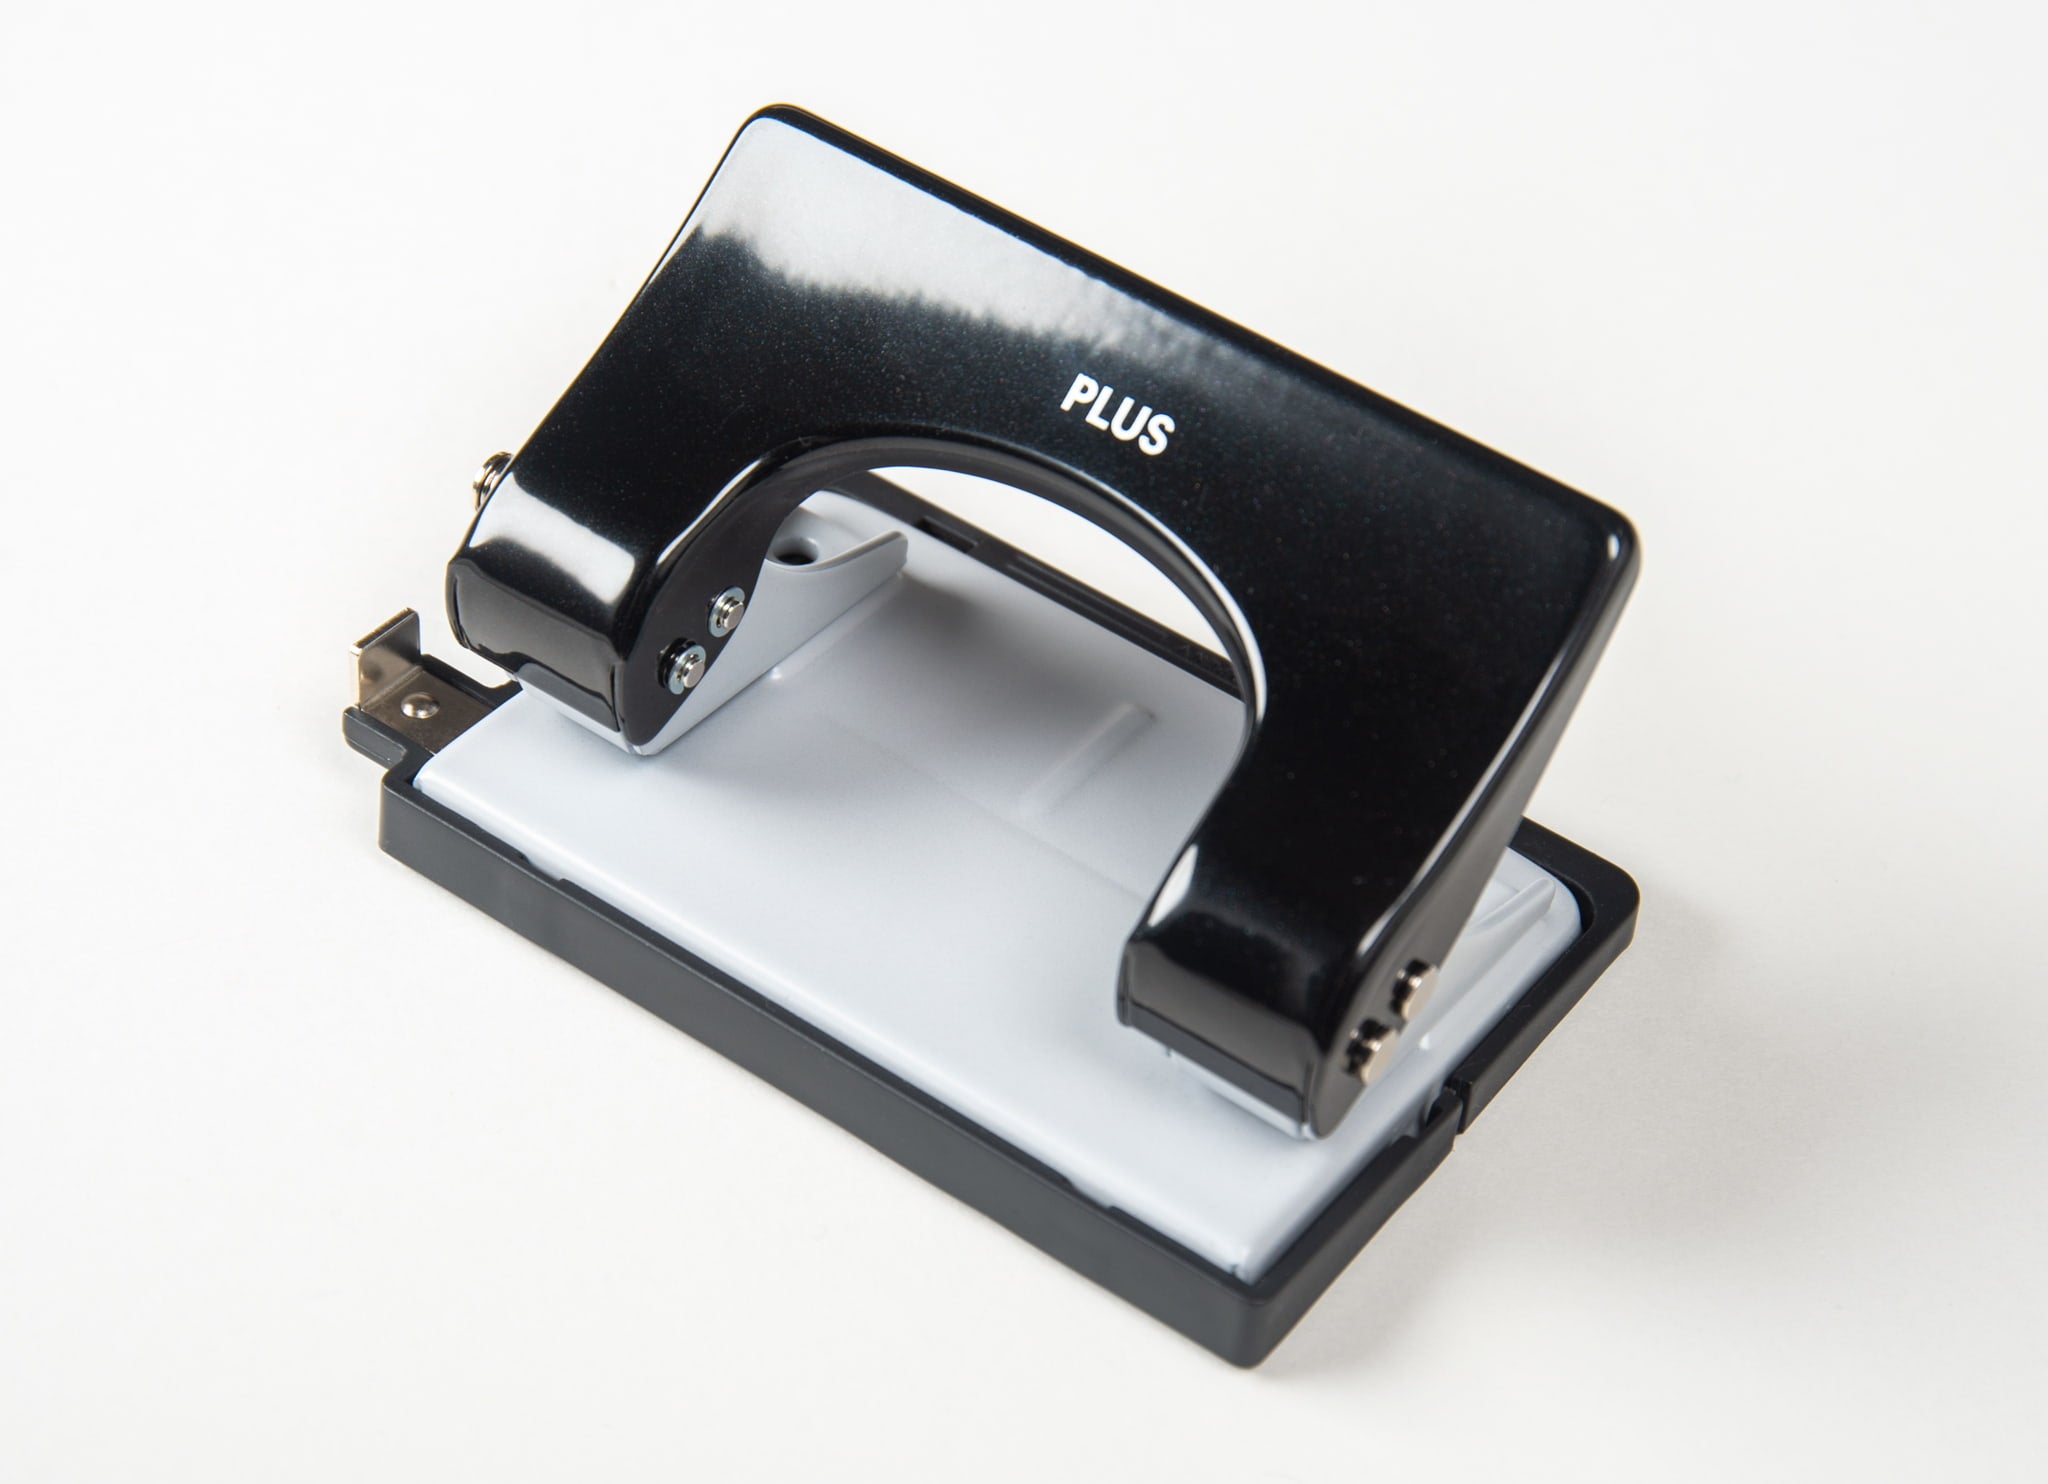 TWO HOLE PUNCH-PUN-400.00